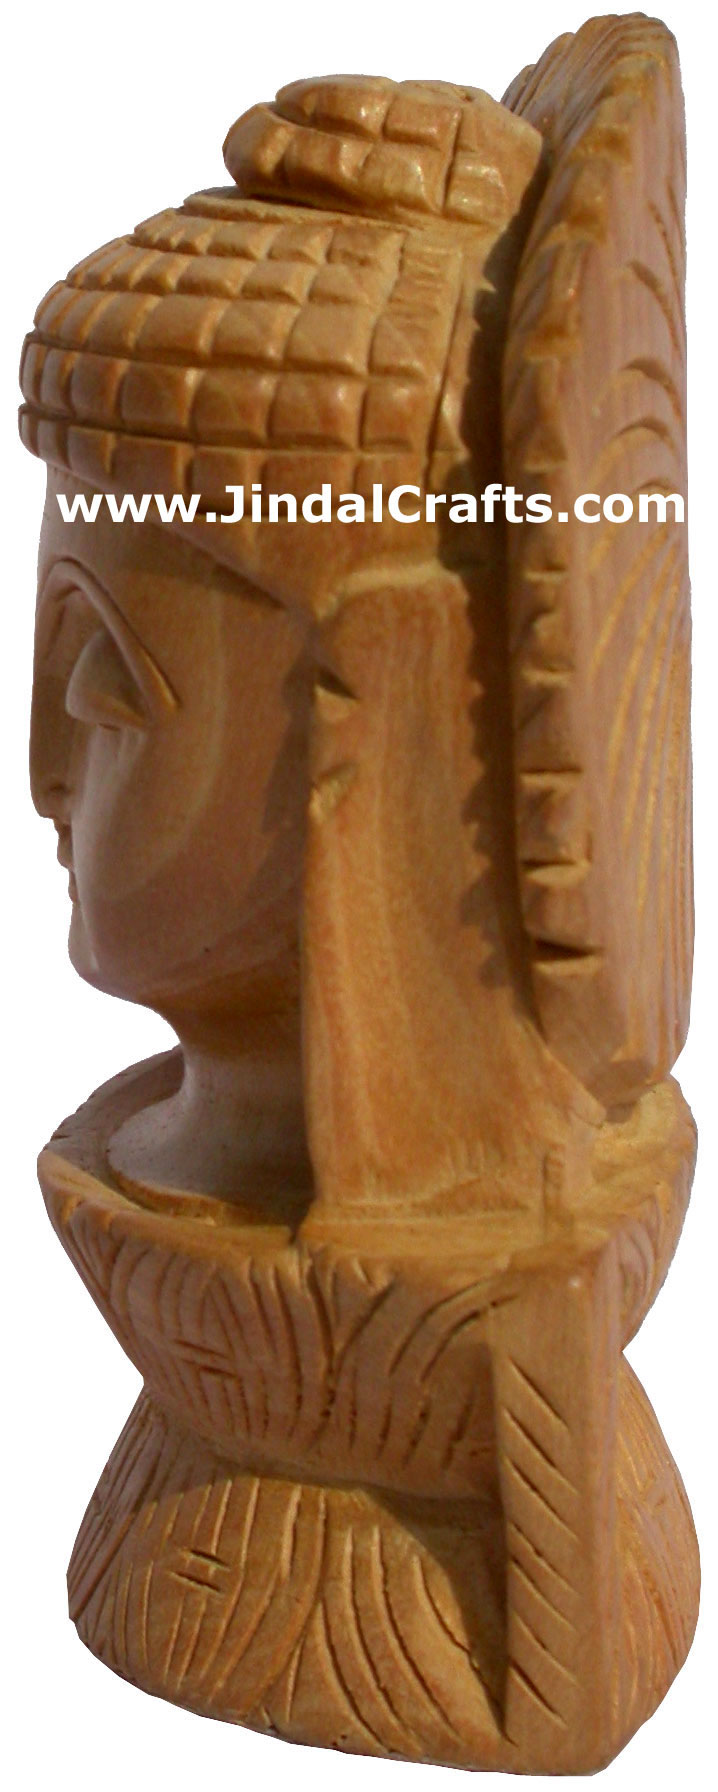 Hand Carved Wood Buddhist Sculpture India Carving Art